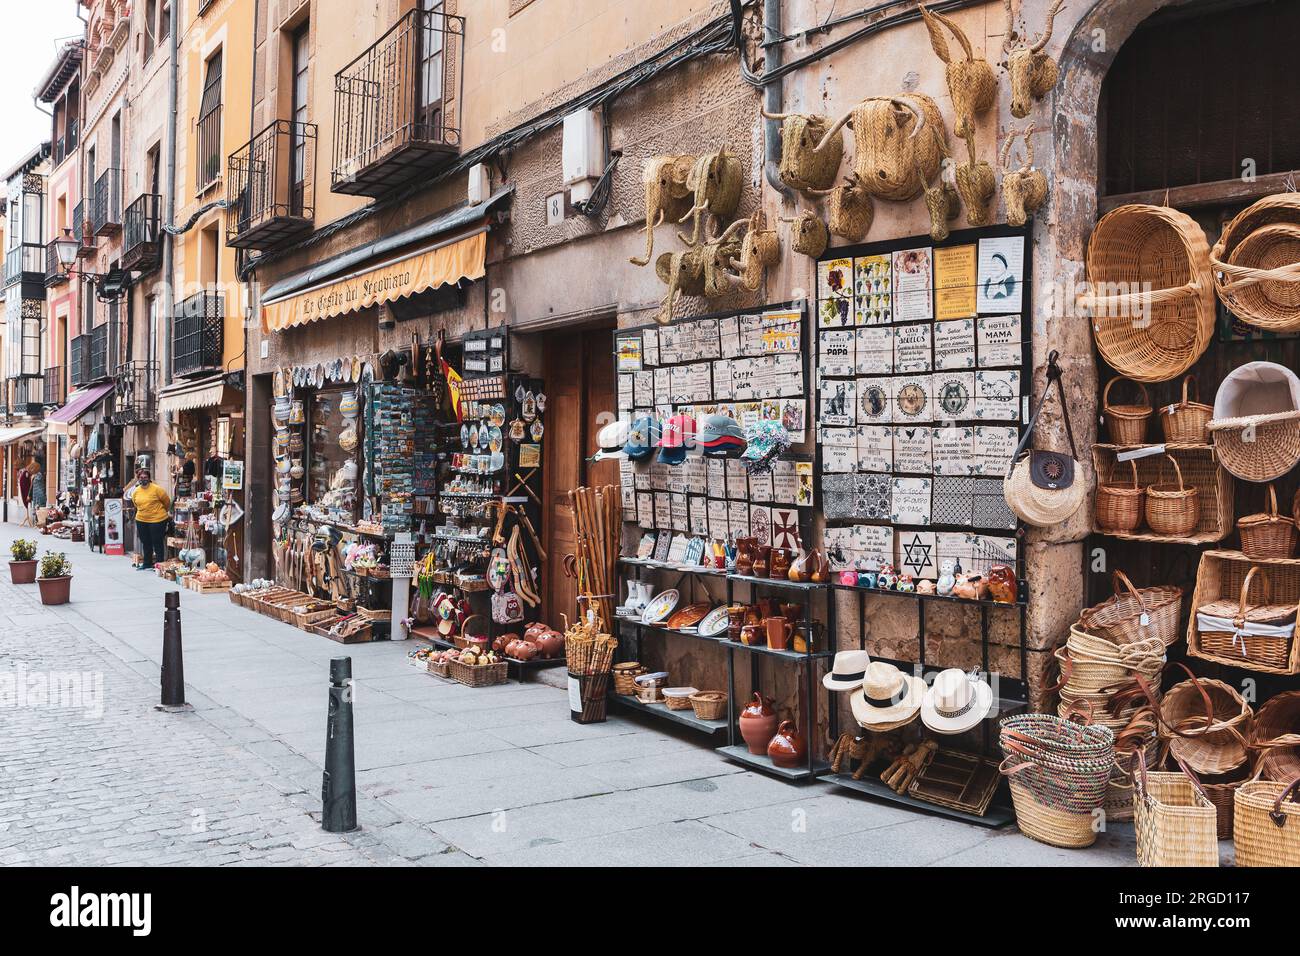 Segovia, Spain, 03.10.21. Souvenir shop display on a narrow medieval street with wicker baskets, hats, decorative tiles, magnets, pottery. Stock Photo